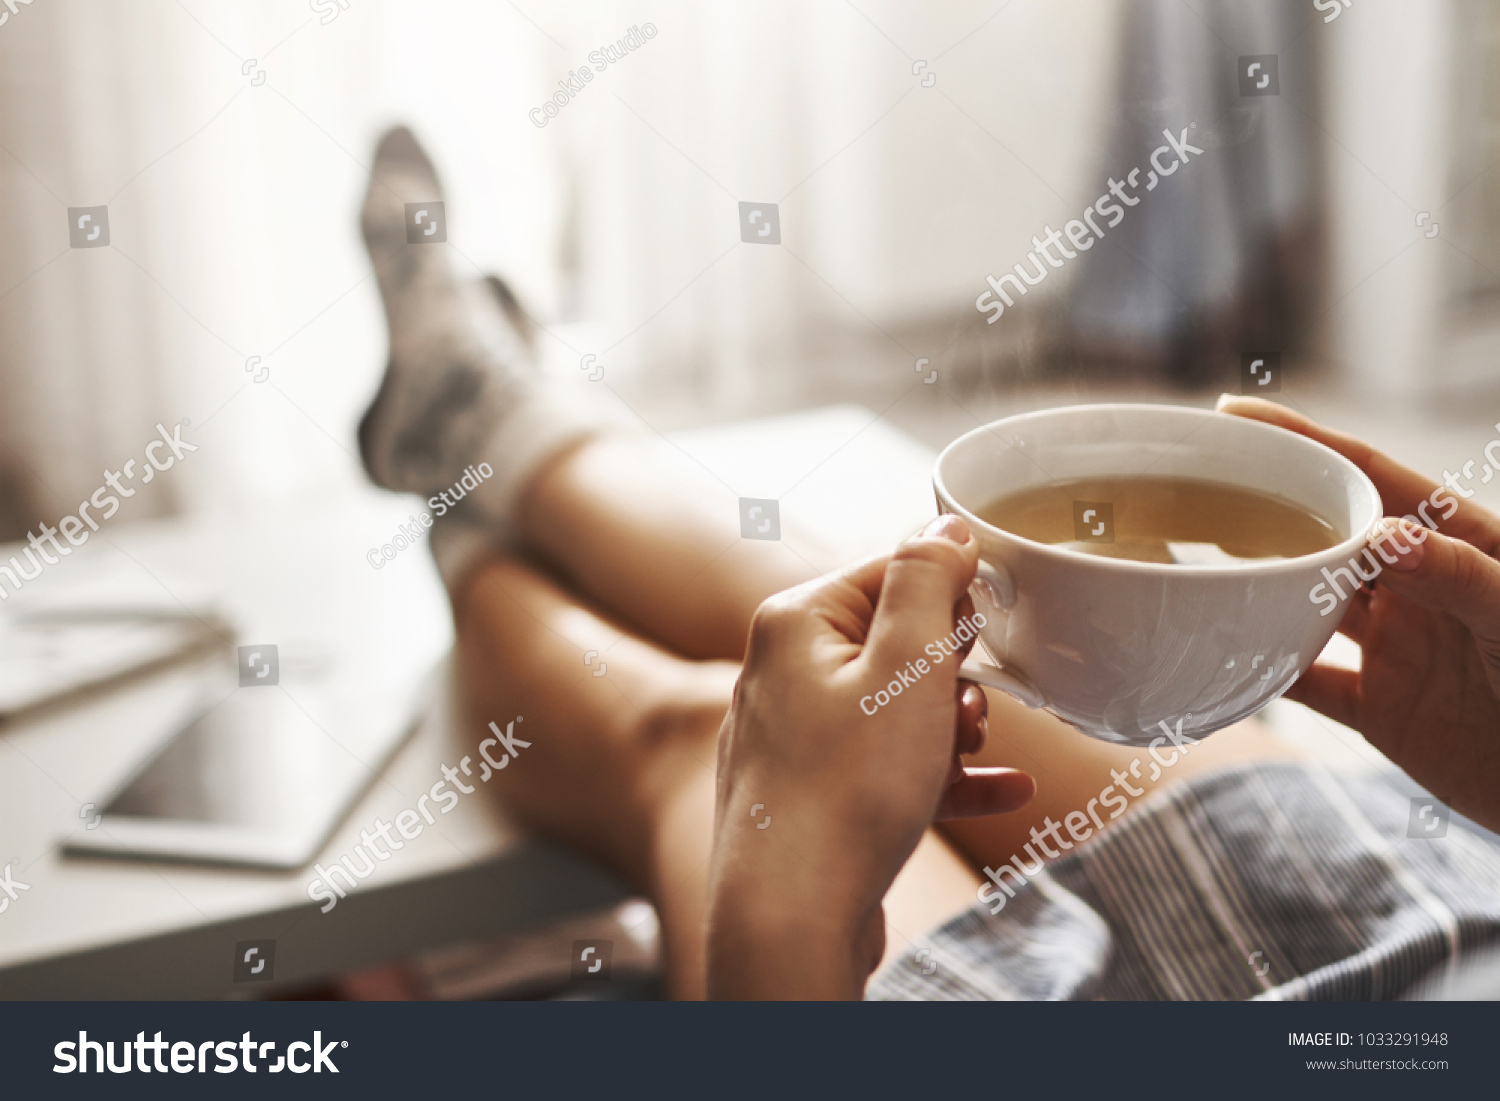 Cup of tea and chill. Woman lying on couch, holding legs on coffee table, drinking hot coffee and enjoying morning, being in dreamy and relaxed mood. Girl in oversized shirt takes break at home #1033291948